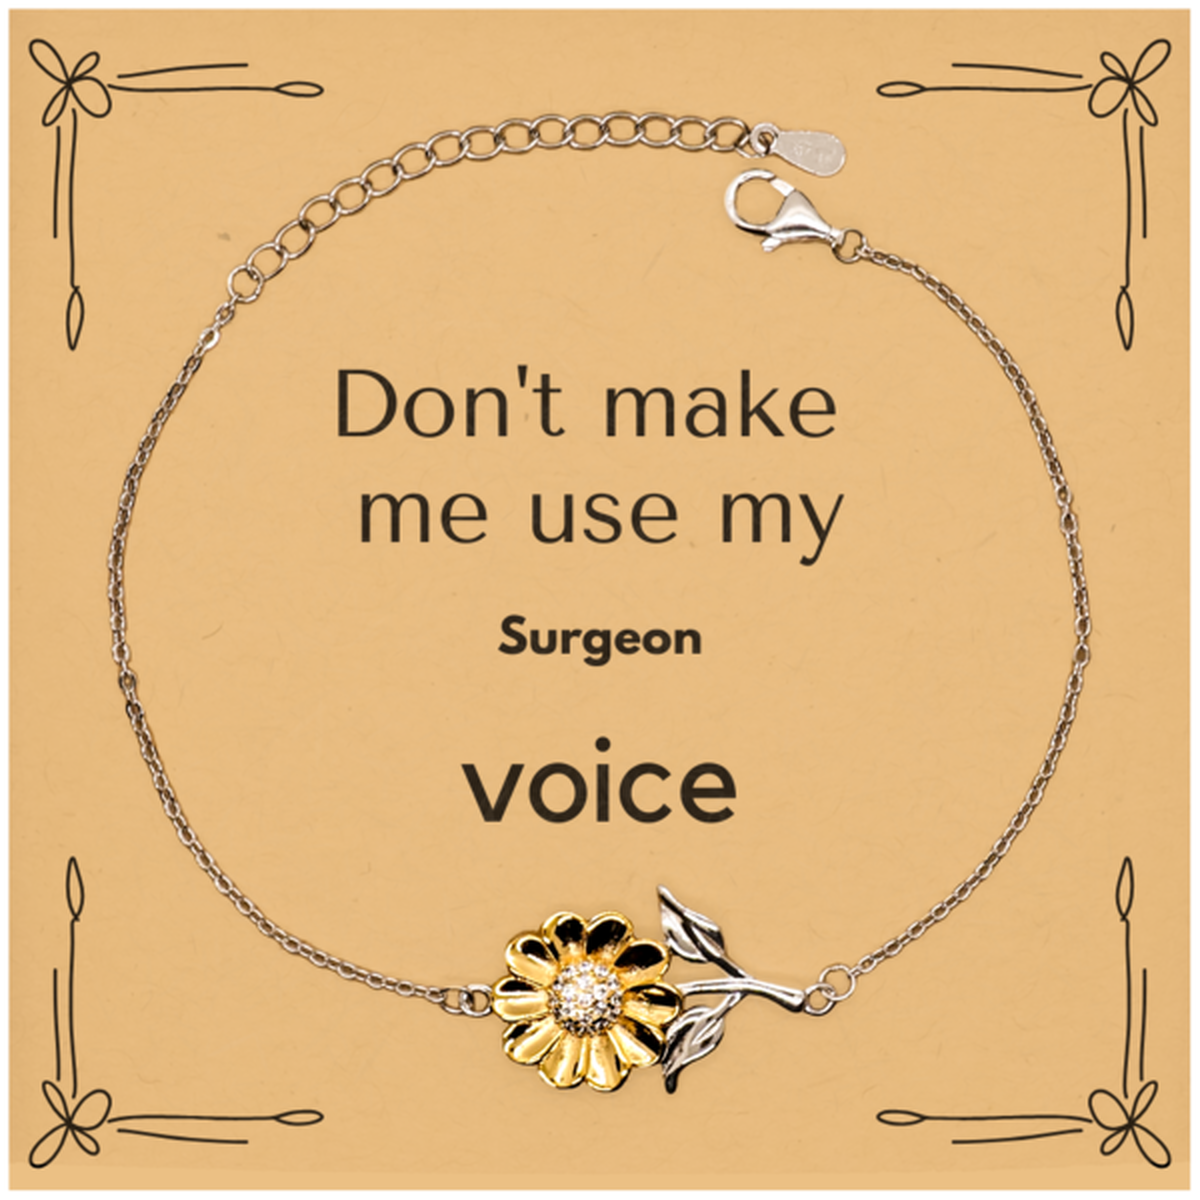 Don't make me use my Surgeon voice, Sarcasm Surgeon Card Gifts, Christmas Surgeon Sunflower Bracelet Birthday Unique Gifts For Surgeon Coworkers, Men, Women, Colleague, Friends